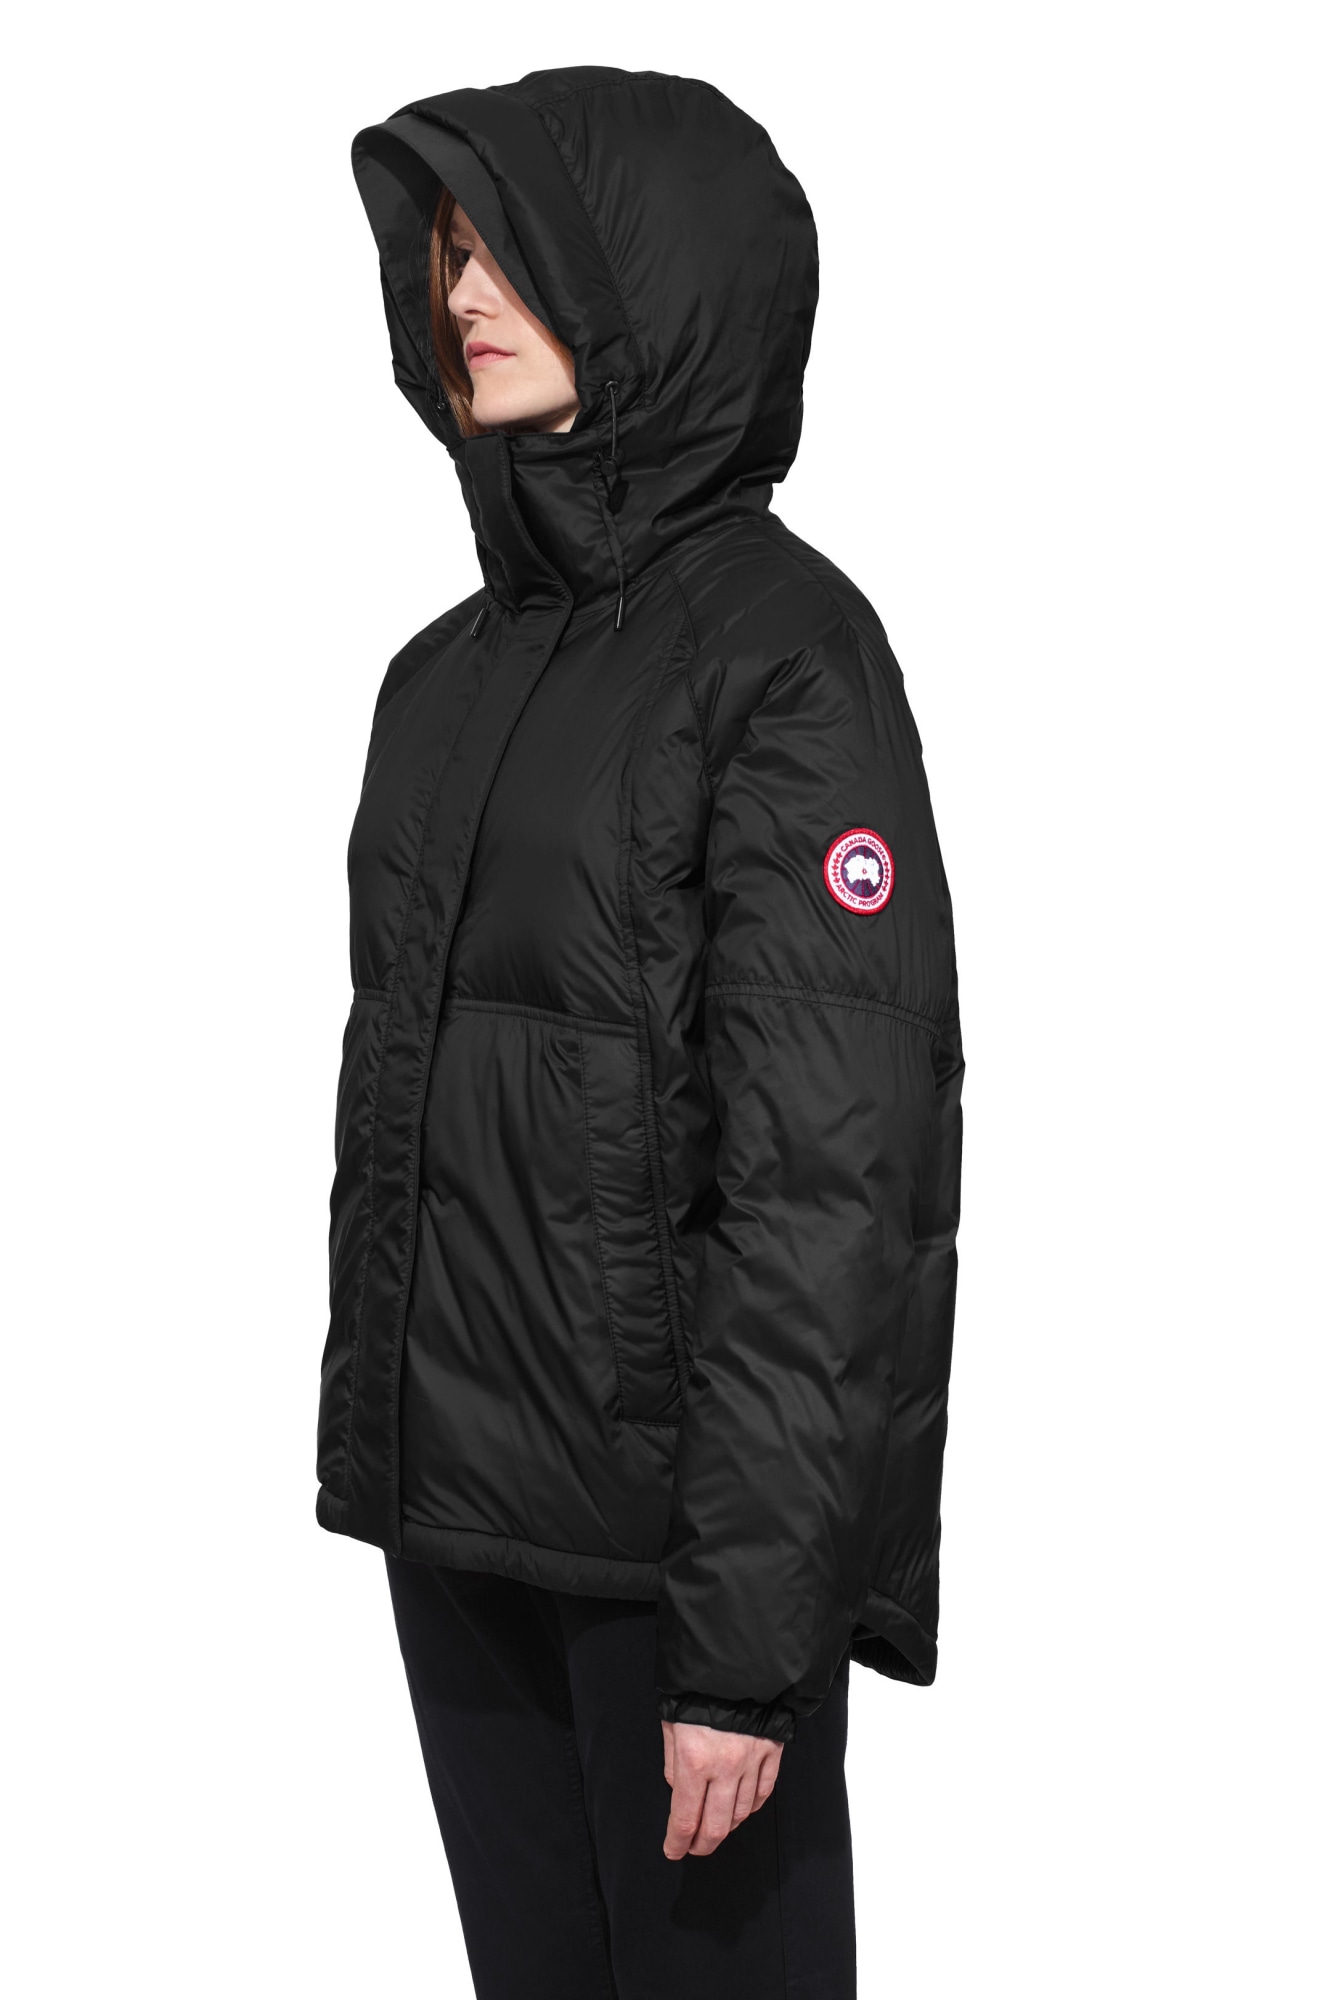 Canada Goose is surging after opening its first store in China (GOOS ...